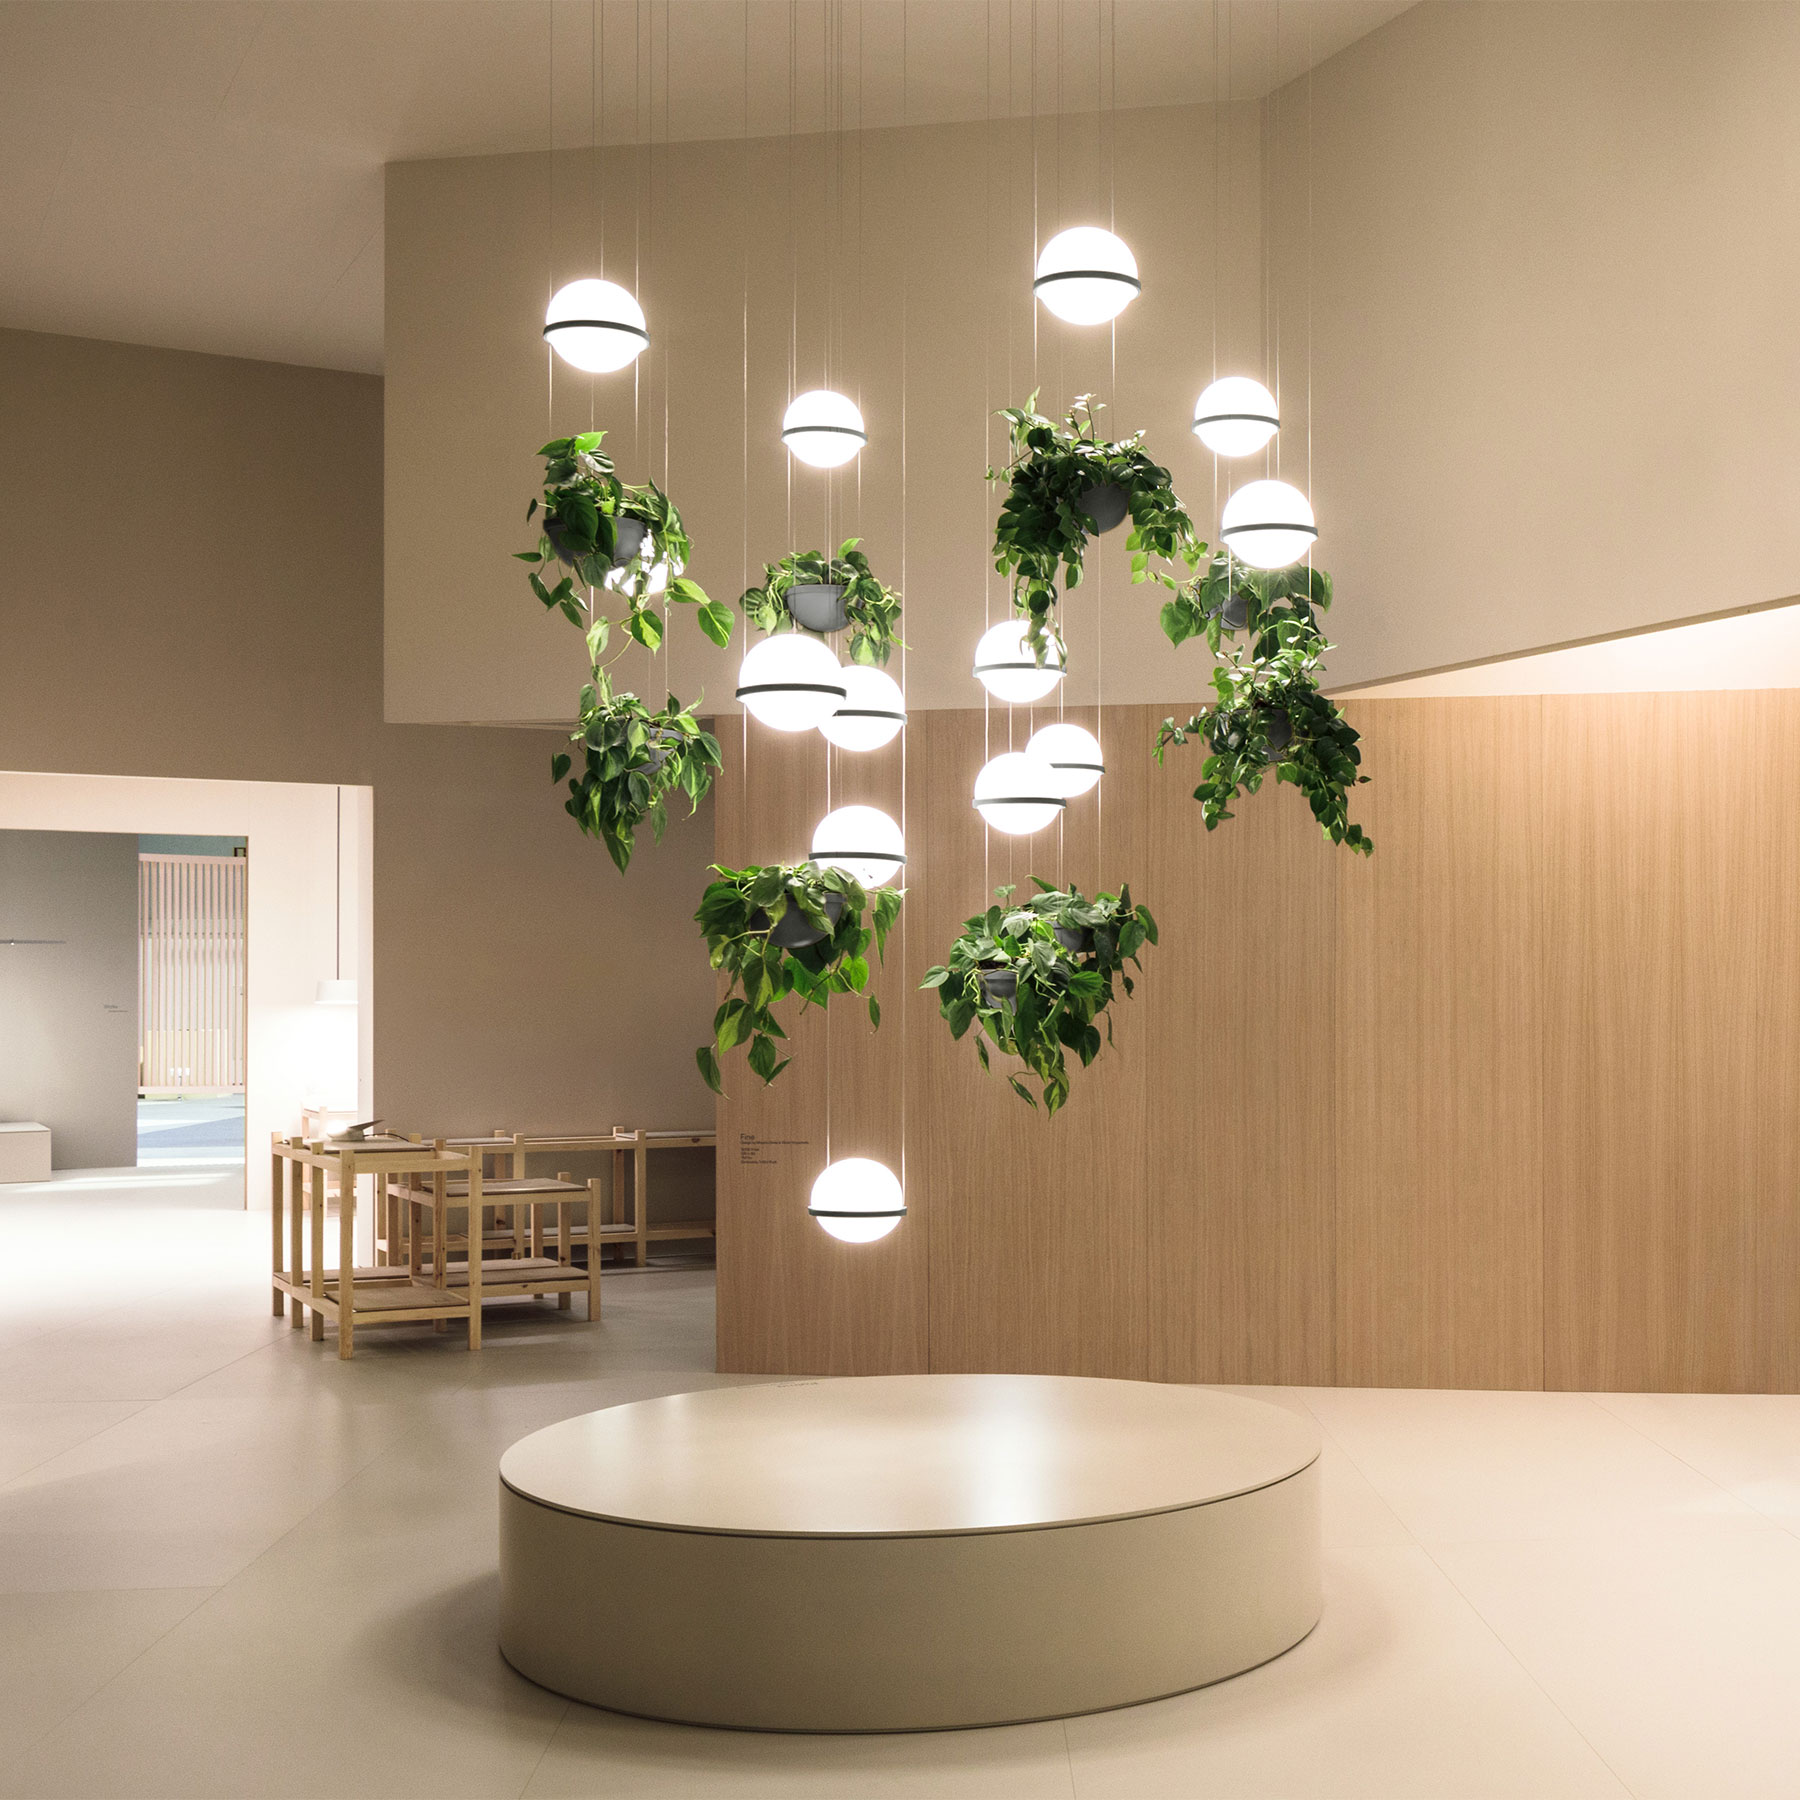 Vibia The Edit - Lighting That Looks to Nature Palma